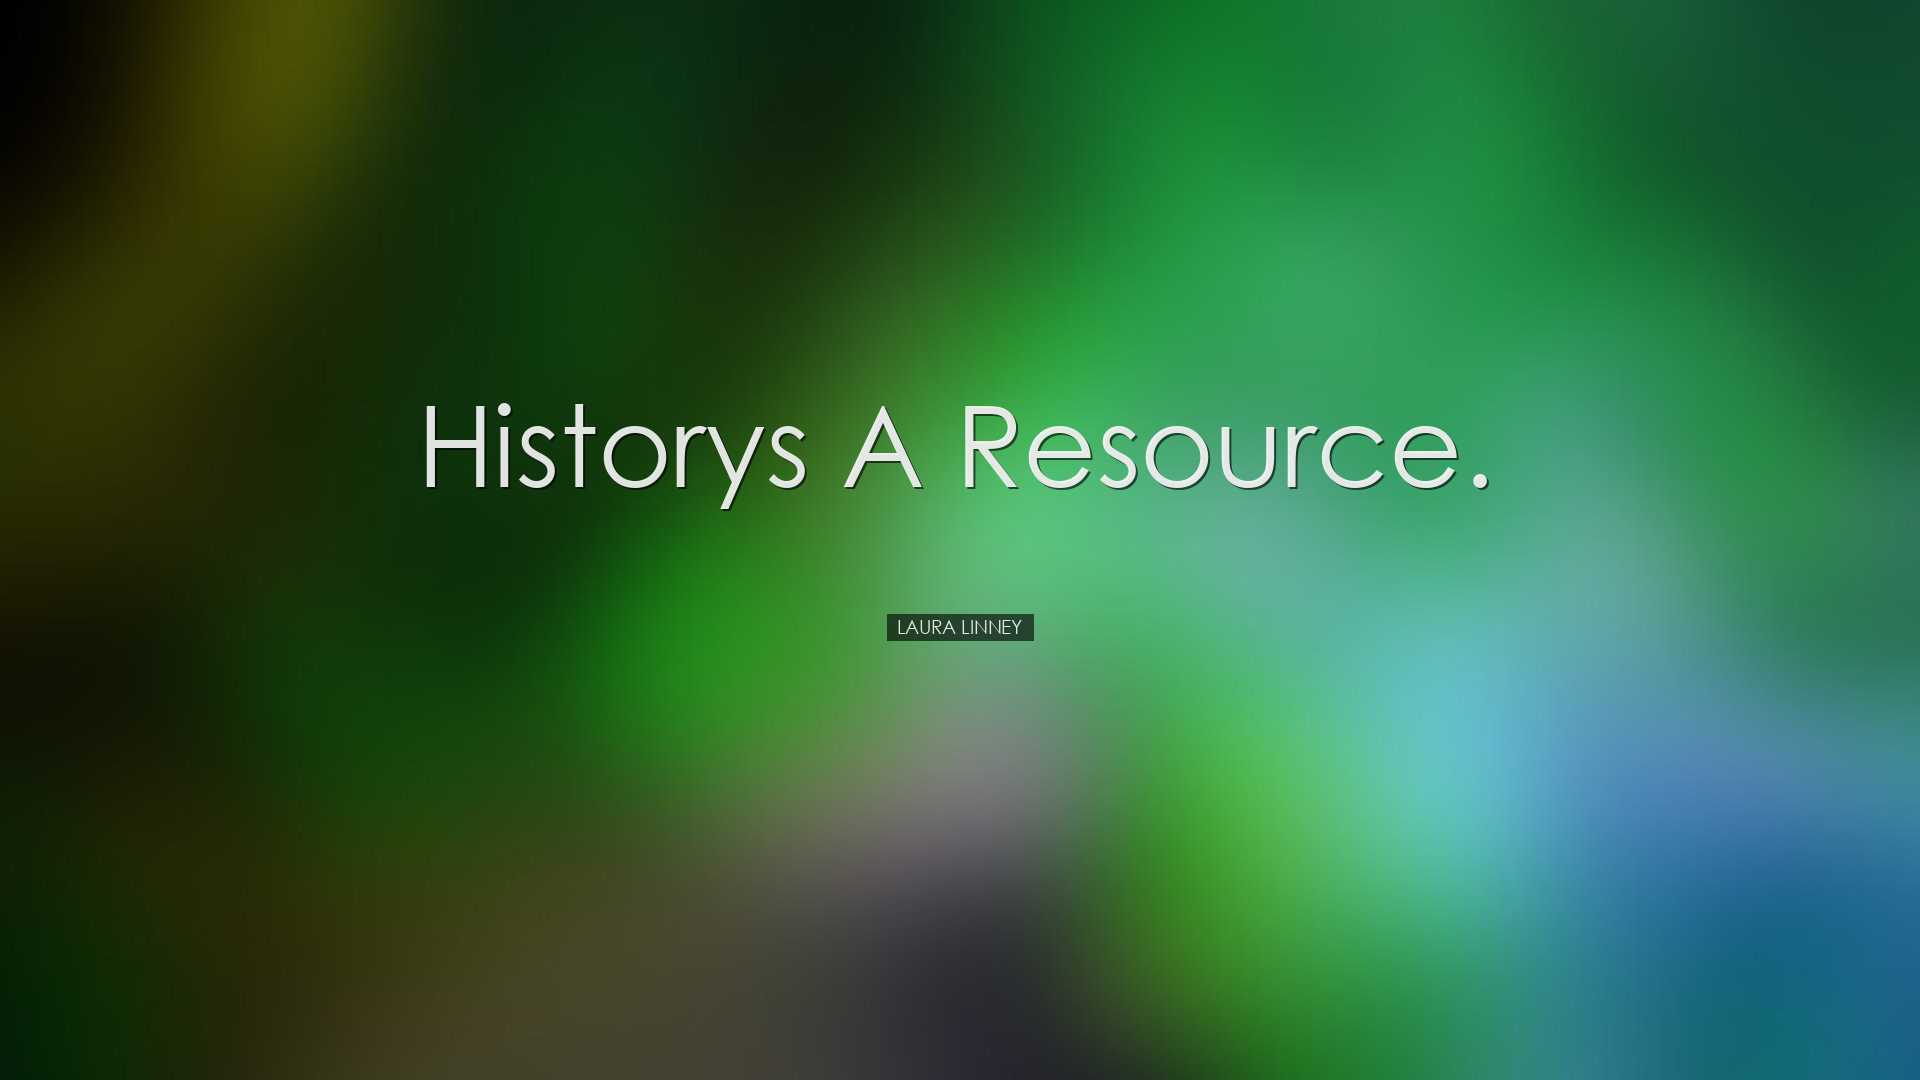 Historys a resource. - Laura Linney